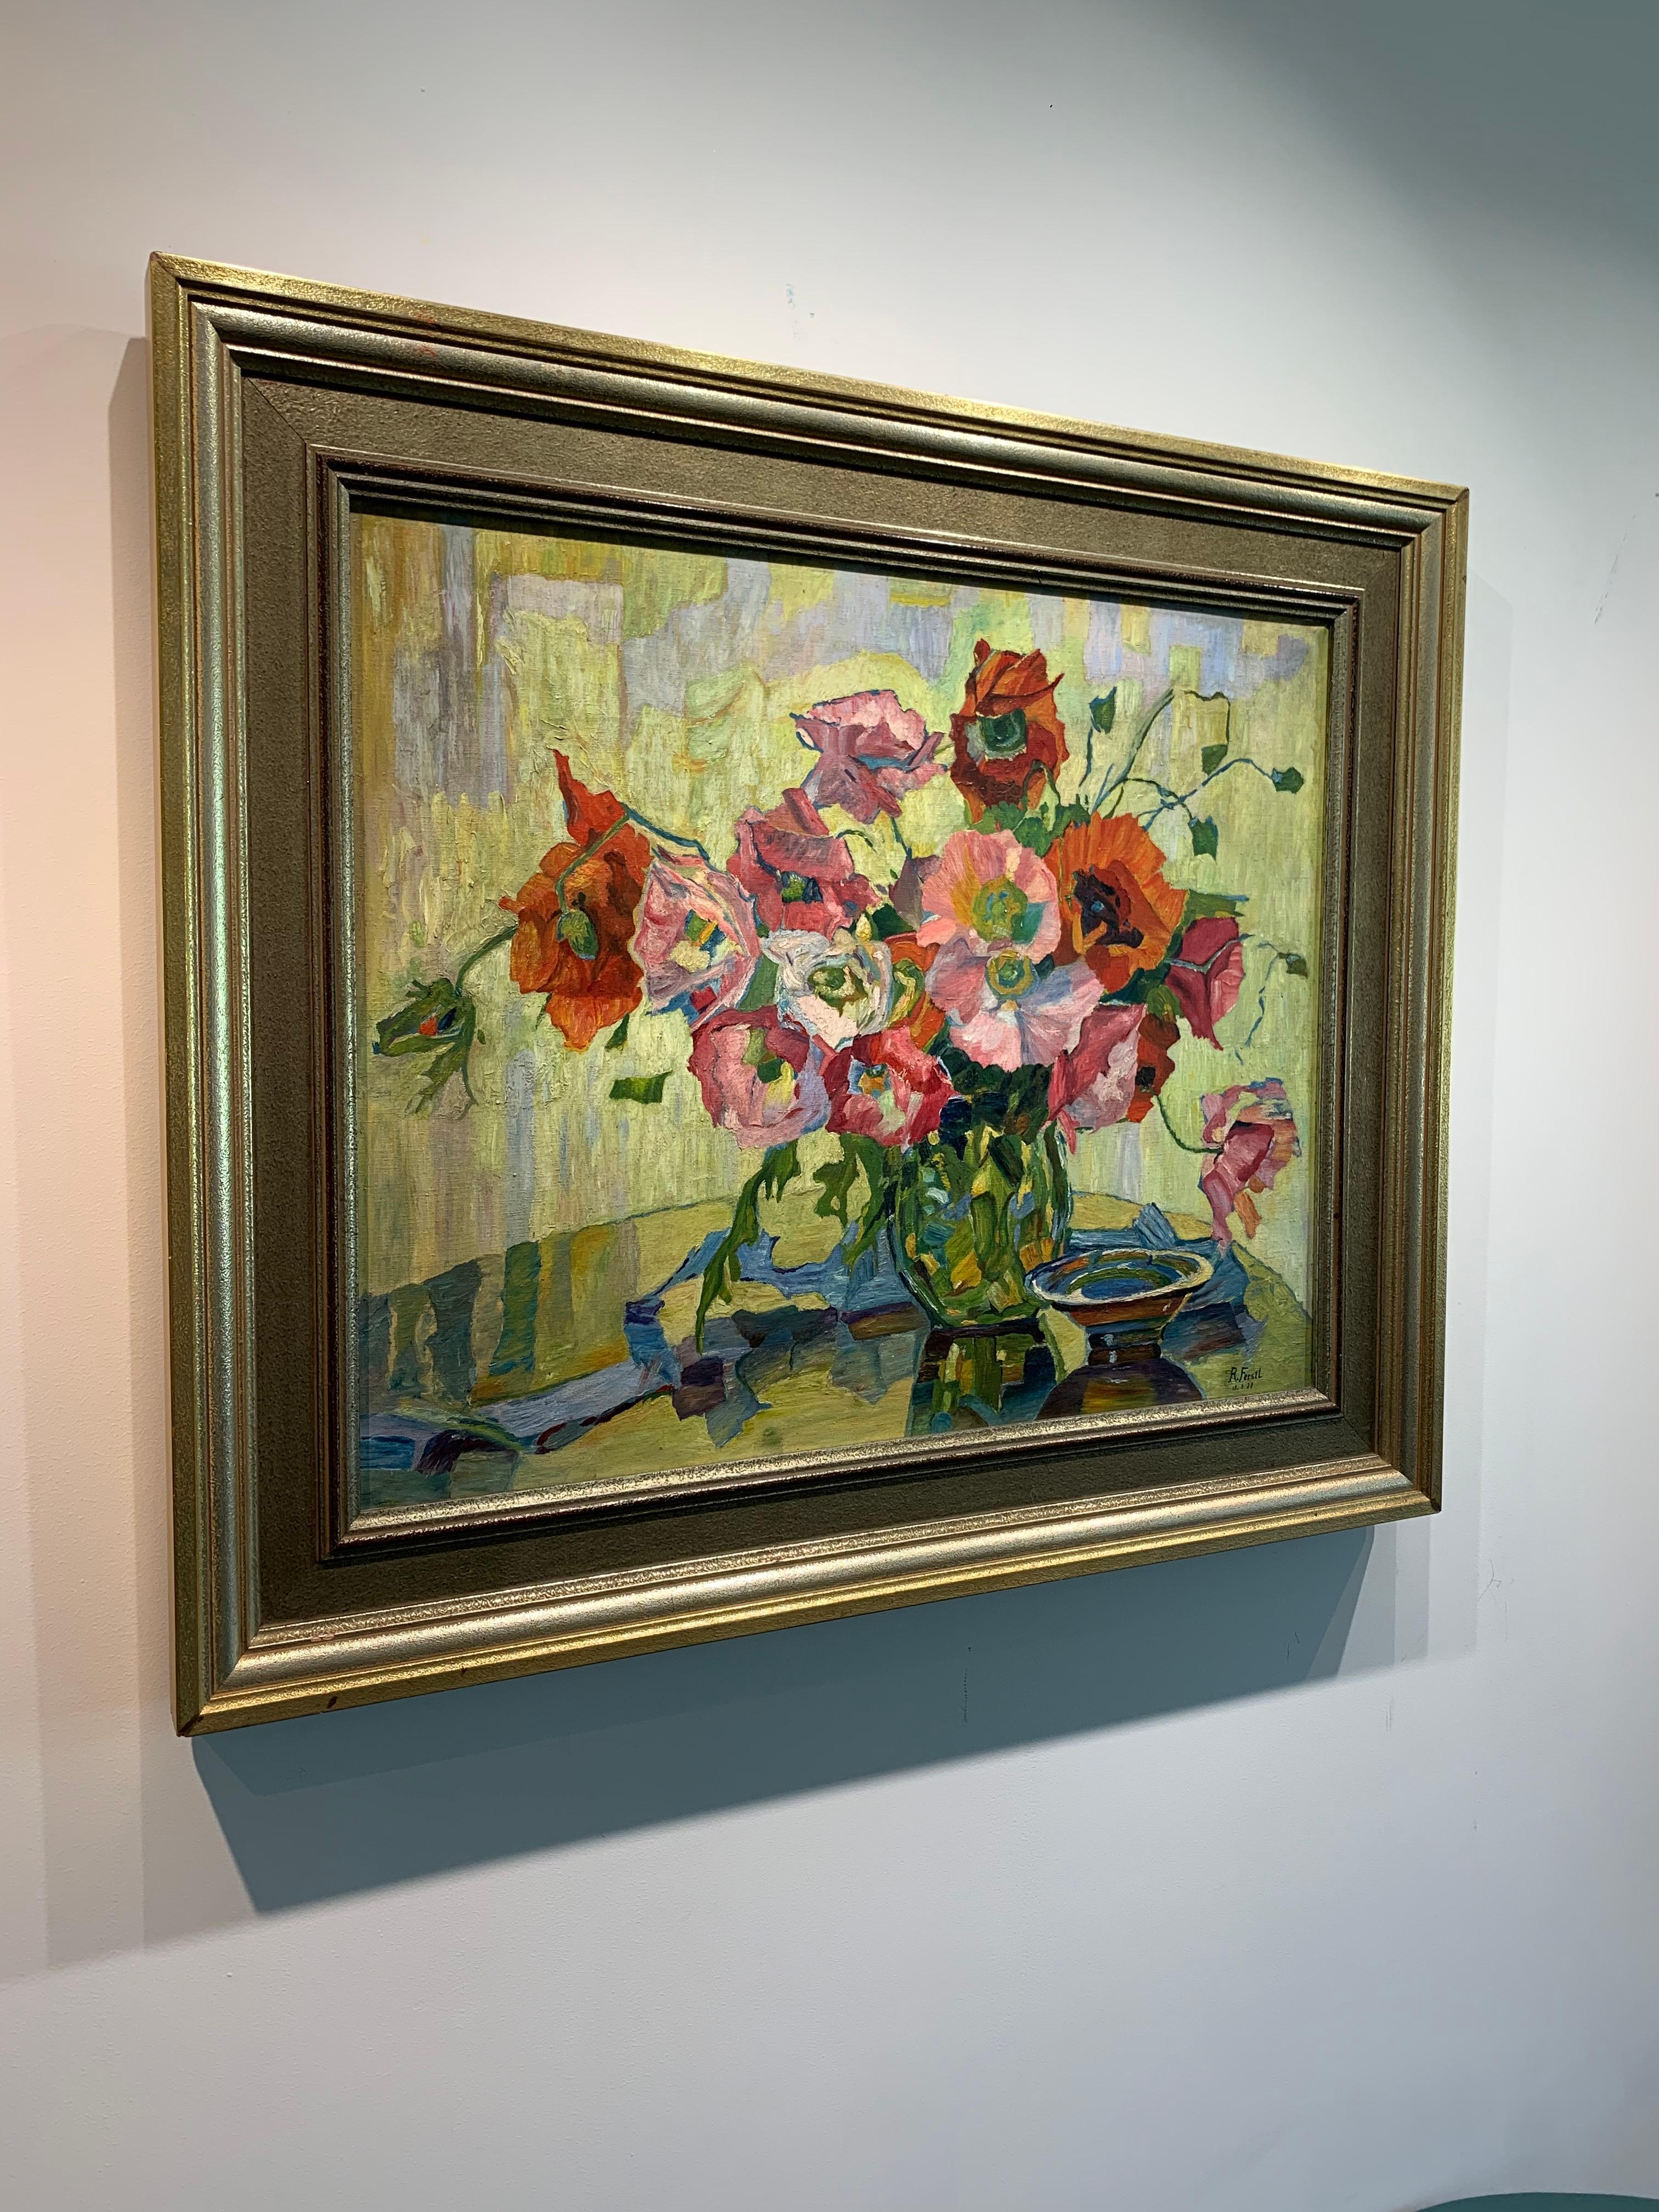 Beautiful still life painting of flowers in a vase. Impressionist in style, this is a pre-war German oil painting by R. Ferstl. It was painted in 1938 and is signed and dated on the front. The oil color is used impasto and creates a beautiful